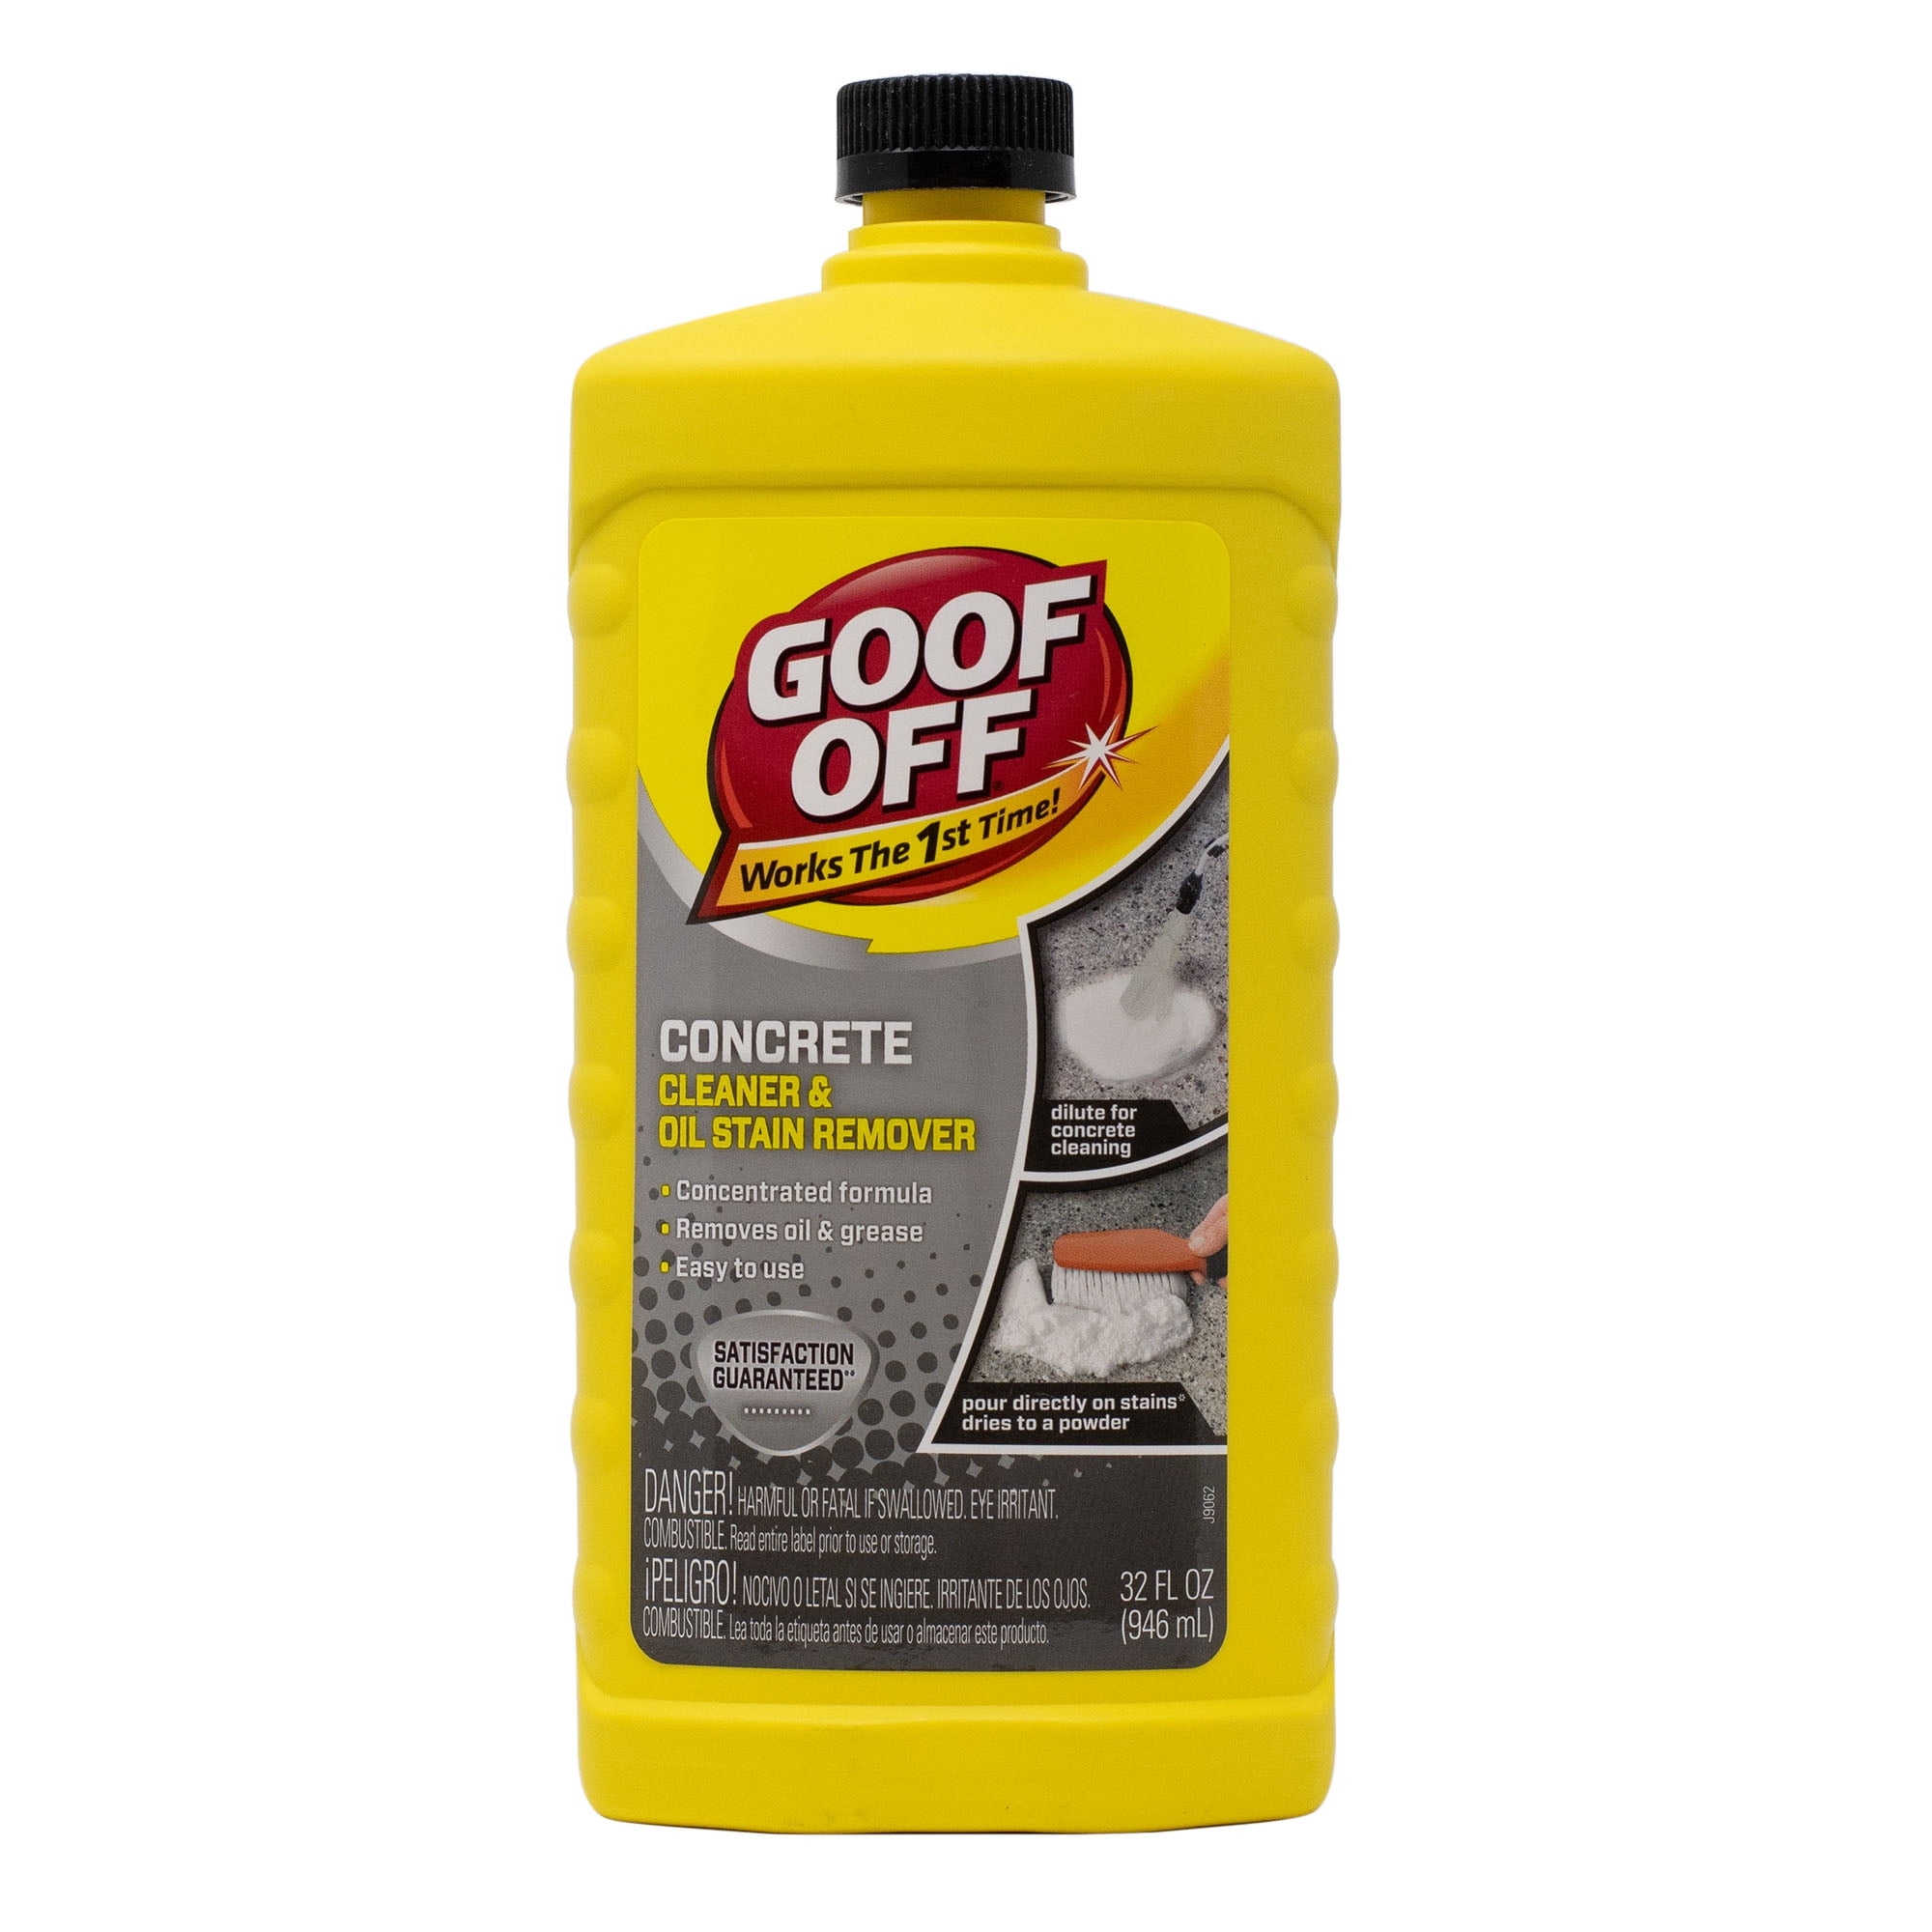 Goof Off Concrete Cleaner and Oil Stain Remover - 22 oz. Bottle -  Walmart.com